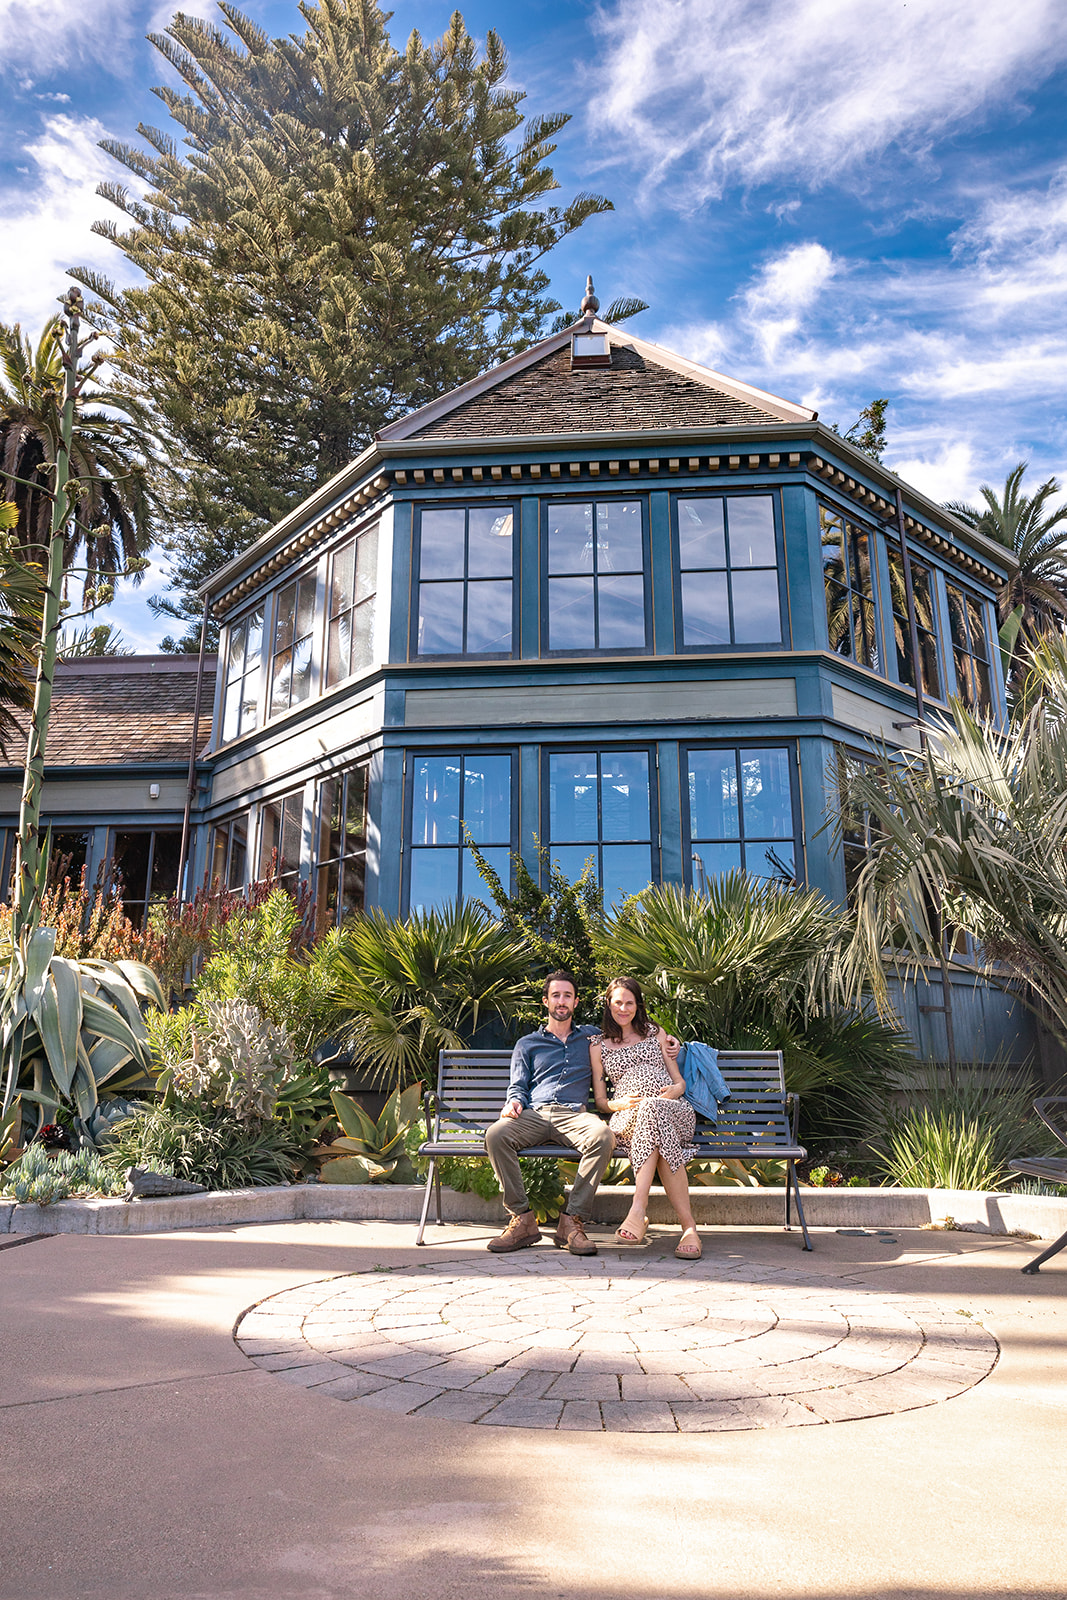 Man and woman sitting on a bench at Sunnyside Conservatory in San Francisco